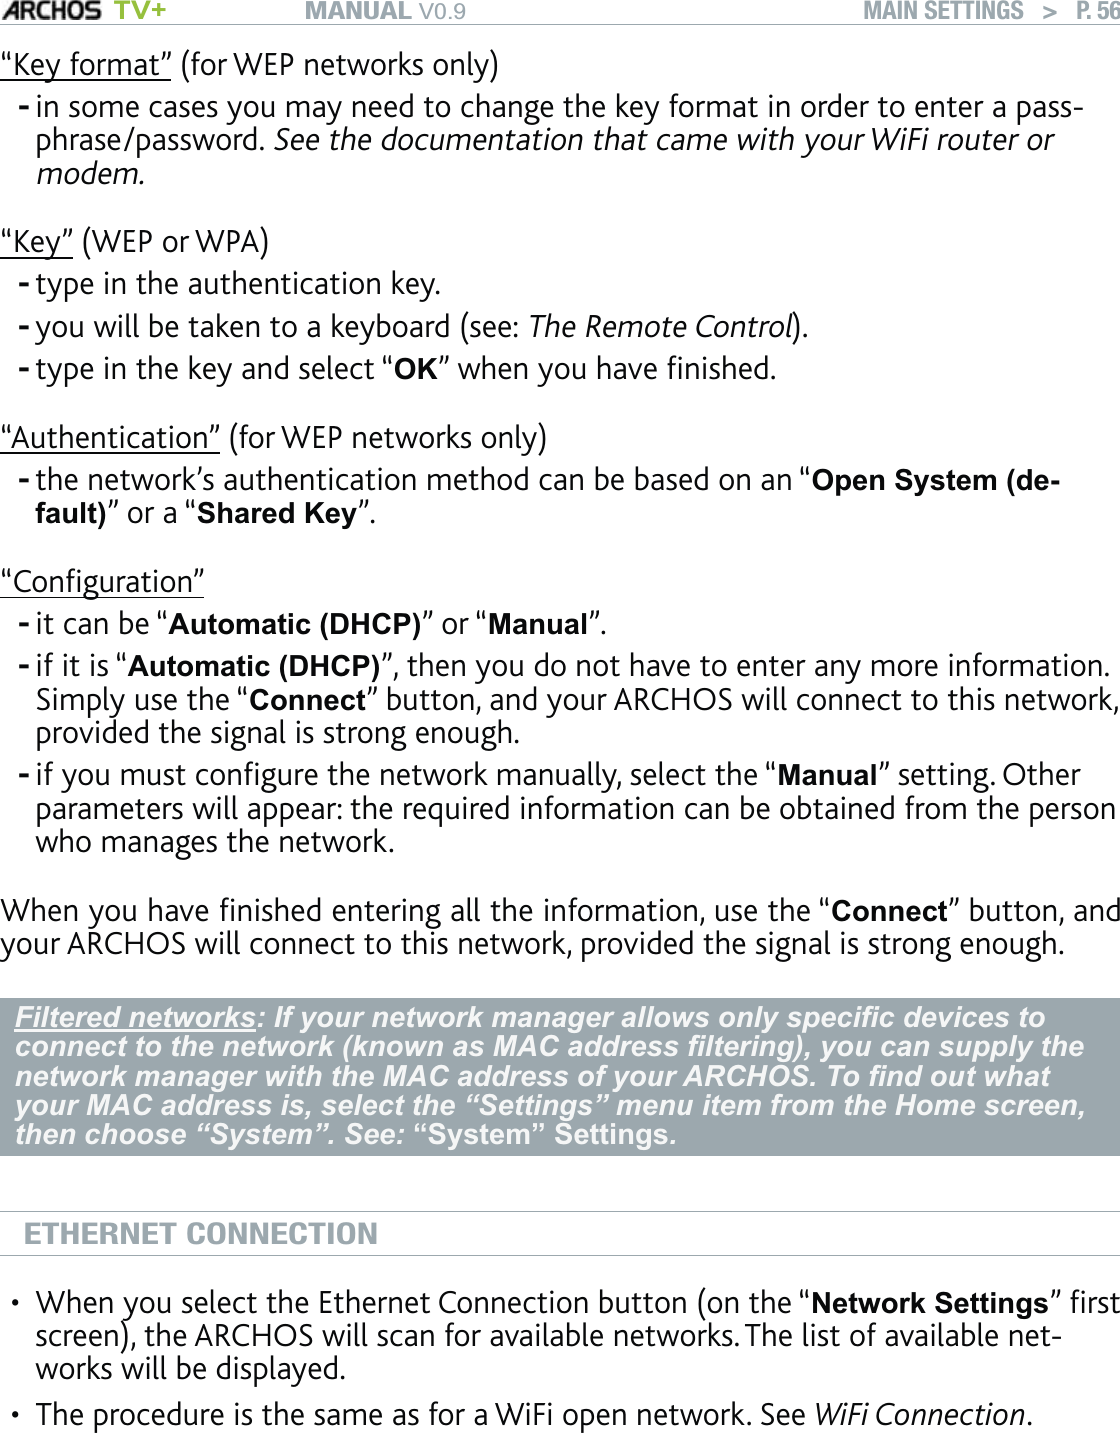 MANUAL V0.9 TV+ MAIN SETTINGS   &gt;   P. 56“Key format” (for WEP networks only)in some cases you may need to change the key format in order to enter a pass-phrase/password. See the documentation that came with your WiFi router or modem.“Key” (WEP or WPA)type in the authentication key. you will be taken to a keyboard (see: The Remote Control).type in the key and select “OK” when you have ﬁnished.“Authentication” (for WEP networks only)the network’s authentication method can be based on an “Open System (de-fault)” or a “Shared Key”.“Conﬁguration”it can be “Automatic (DHCP)” or “Manual”.if it is “Automatic (DHCP)”, then you do not have to enter any more information. Simply use the “Connect” button, and your ARCHOS will connect to this network, provided the signal is strong enough.if you must conﬁgure the network manually, select the “Manual” setting. Other parameters will appear: the required information can be obtained from the person who manages the network.When you have ﬁnished entering all the information, use the “Connect” button, and your ARCHOS will connect to this network, provided the signal is strong enough.Filtered networks: If your network manager allows only speciﬁc devices to connect to the network (known as MAC address ﬁltering), you can supply the network manager with the MAC address of your ARCHOS. To ﬁnd out what your MAC address is, select the “Settings” menu item from the Home screen, then choose “System”. See: “System” Settings.ETHERNET CONNECTIONWhen you select the Ethernet Connection button (on the “Network Settings” ﬁrst screen), the ARCHOS will scan for available networks. The list of available net-works will be displayed.The procedure is the same as for a WiFi open network. See WiFi Connection.--------••